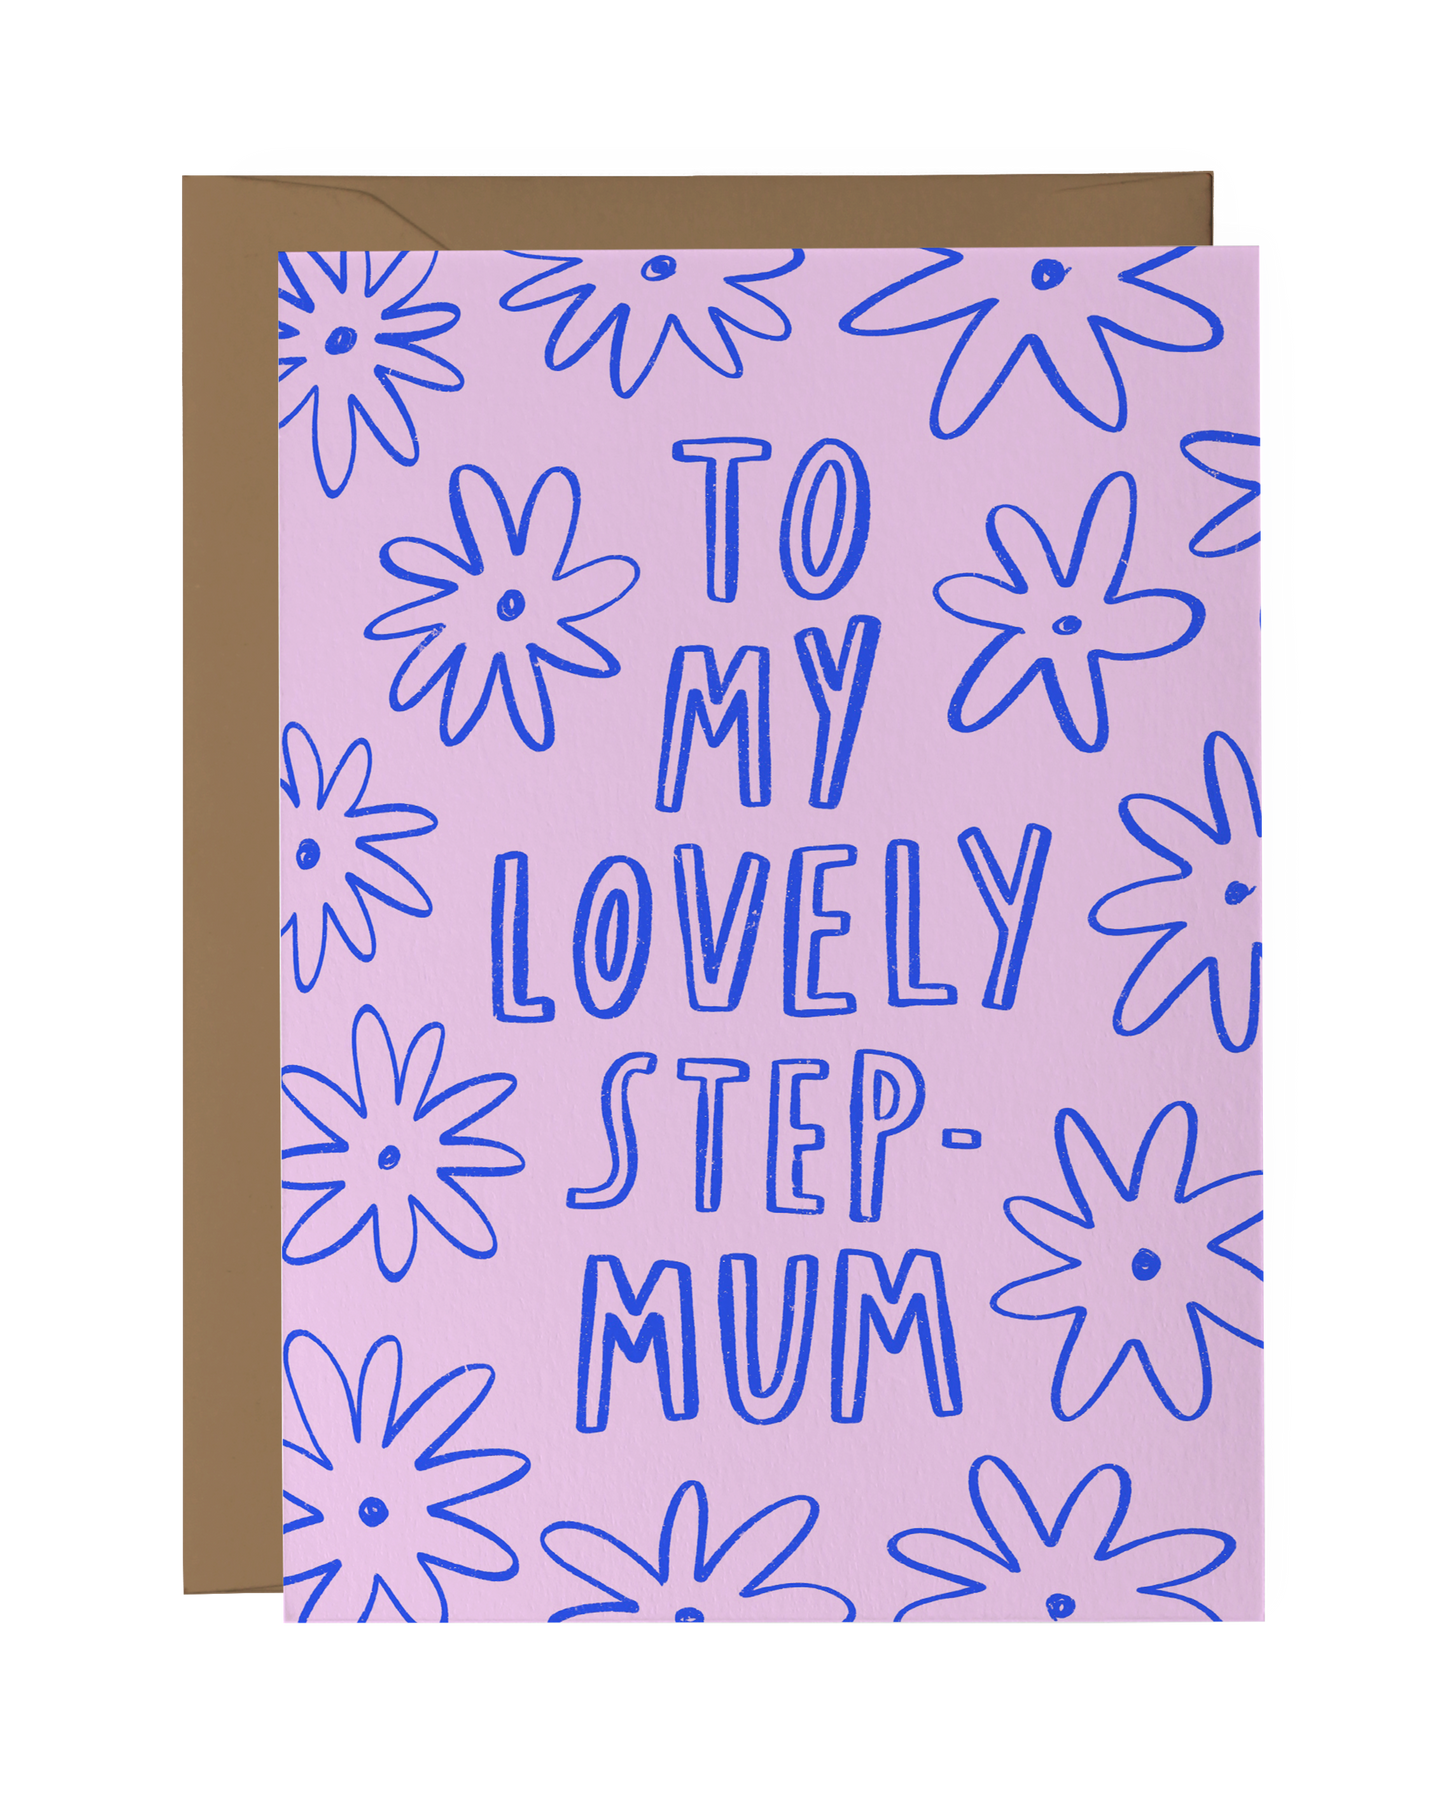 To My Lovely Step-Mum